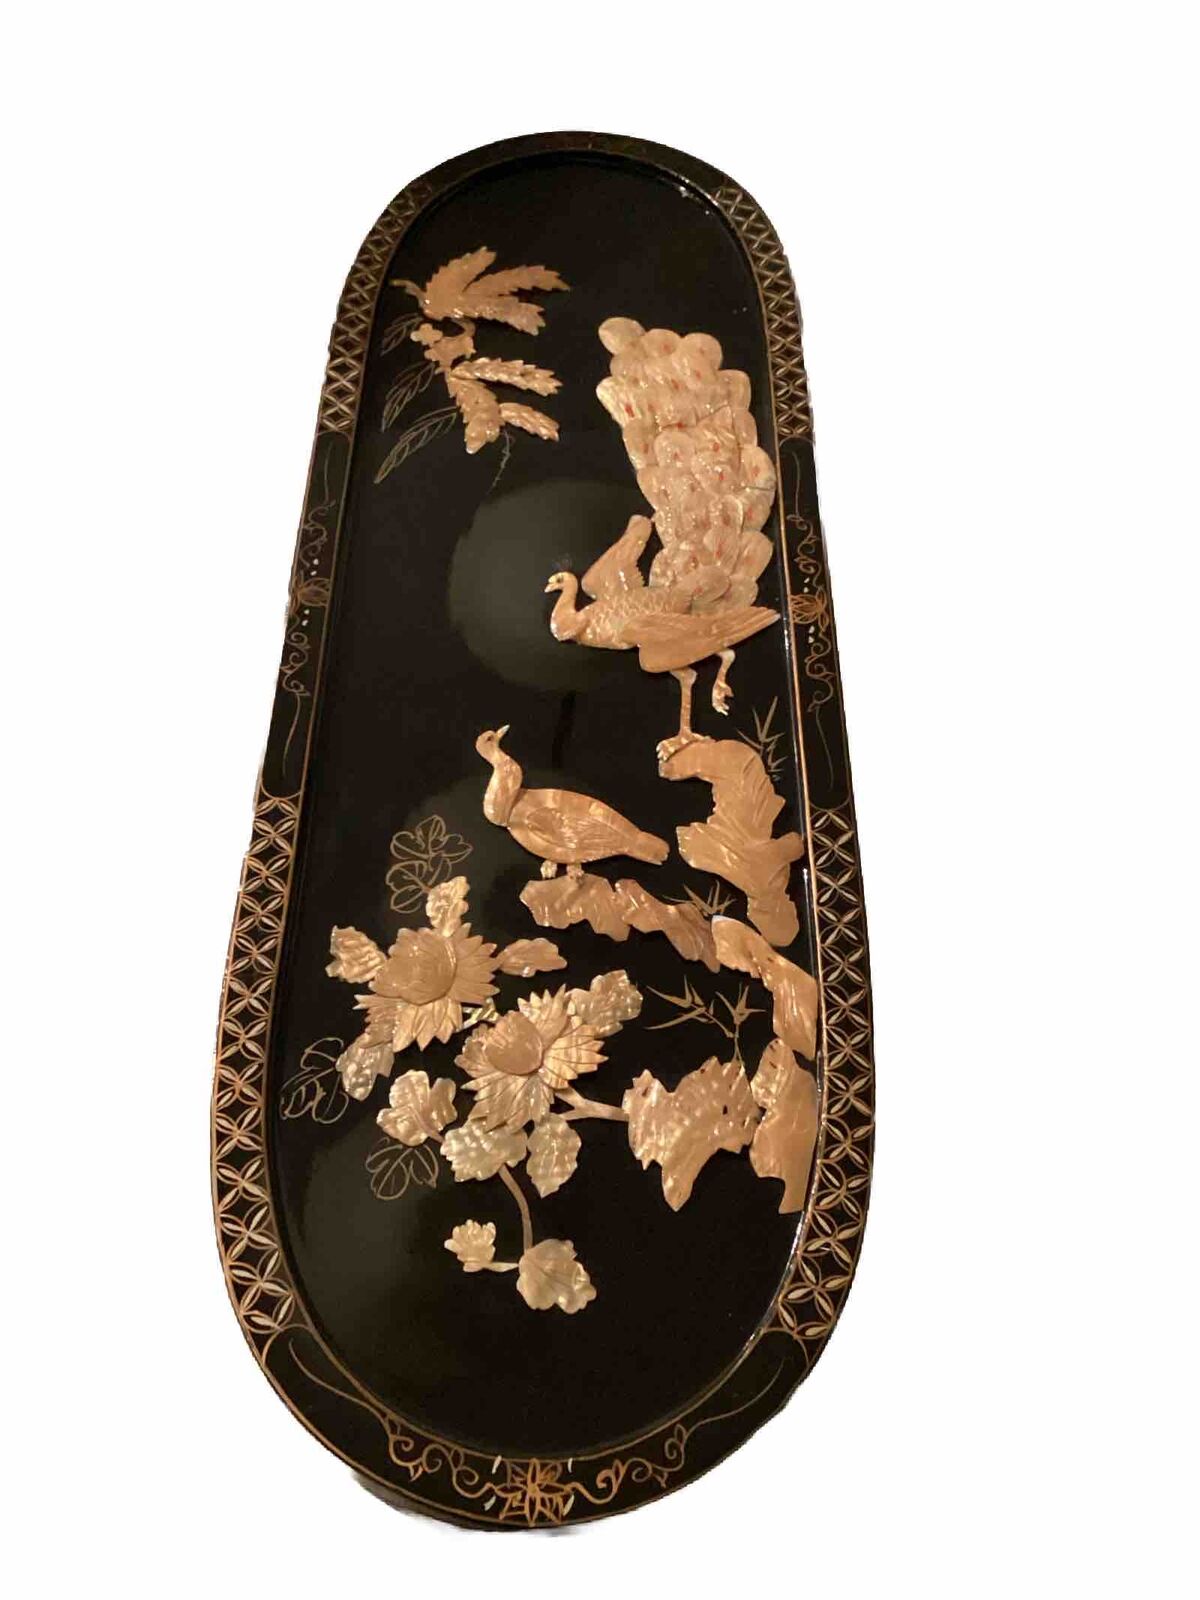 Vintage Japanese Black Peacock & Floral Panel Design Made From Shell